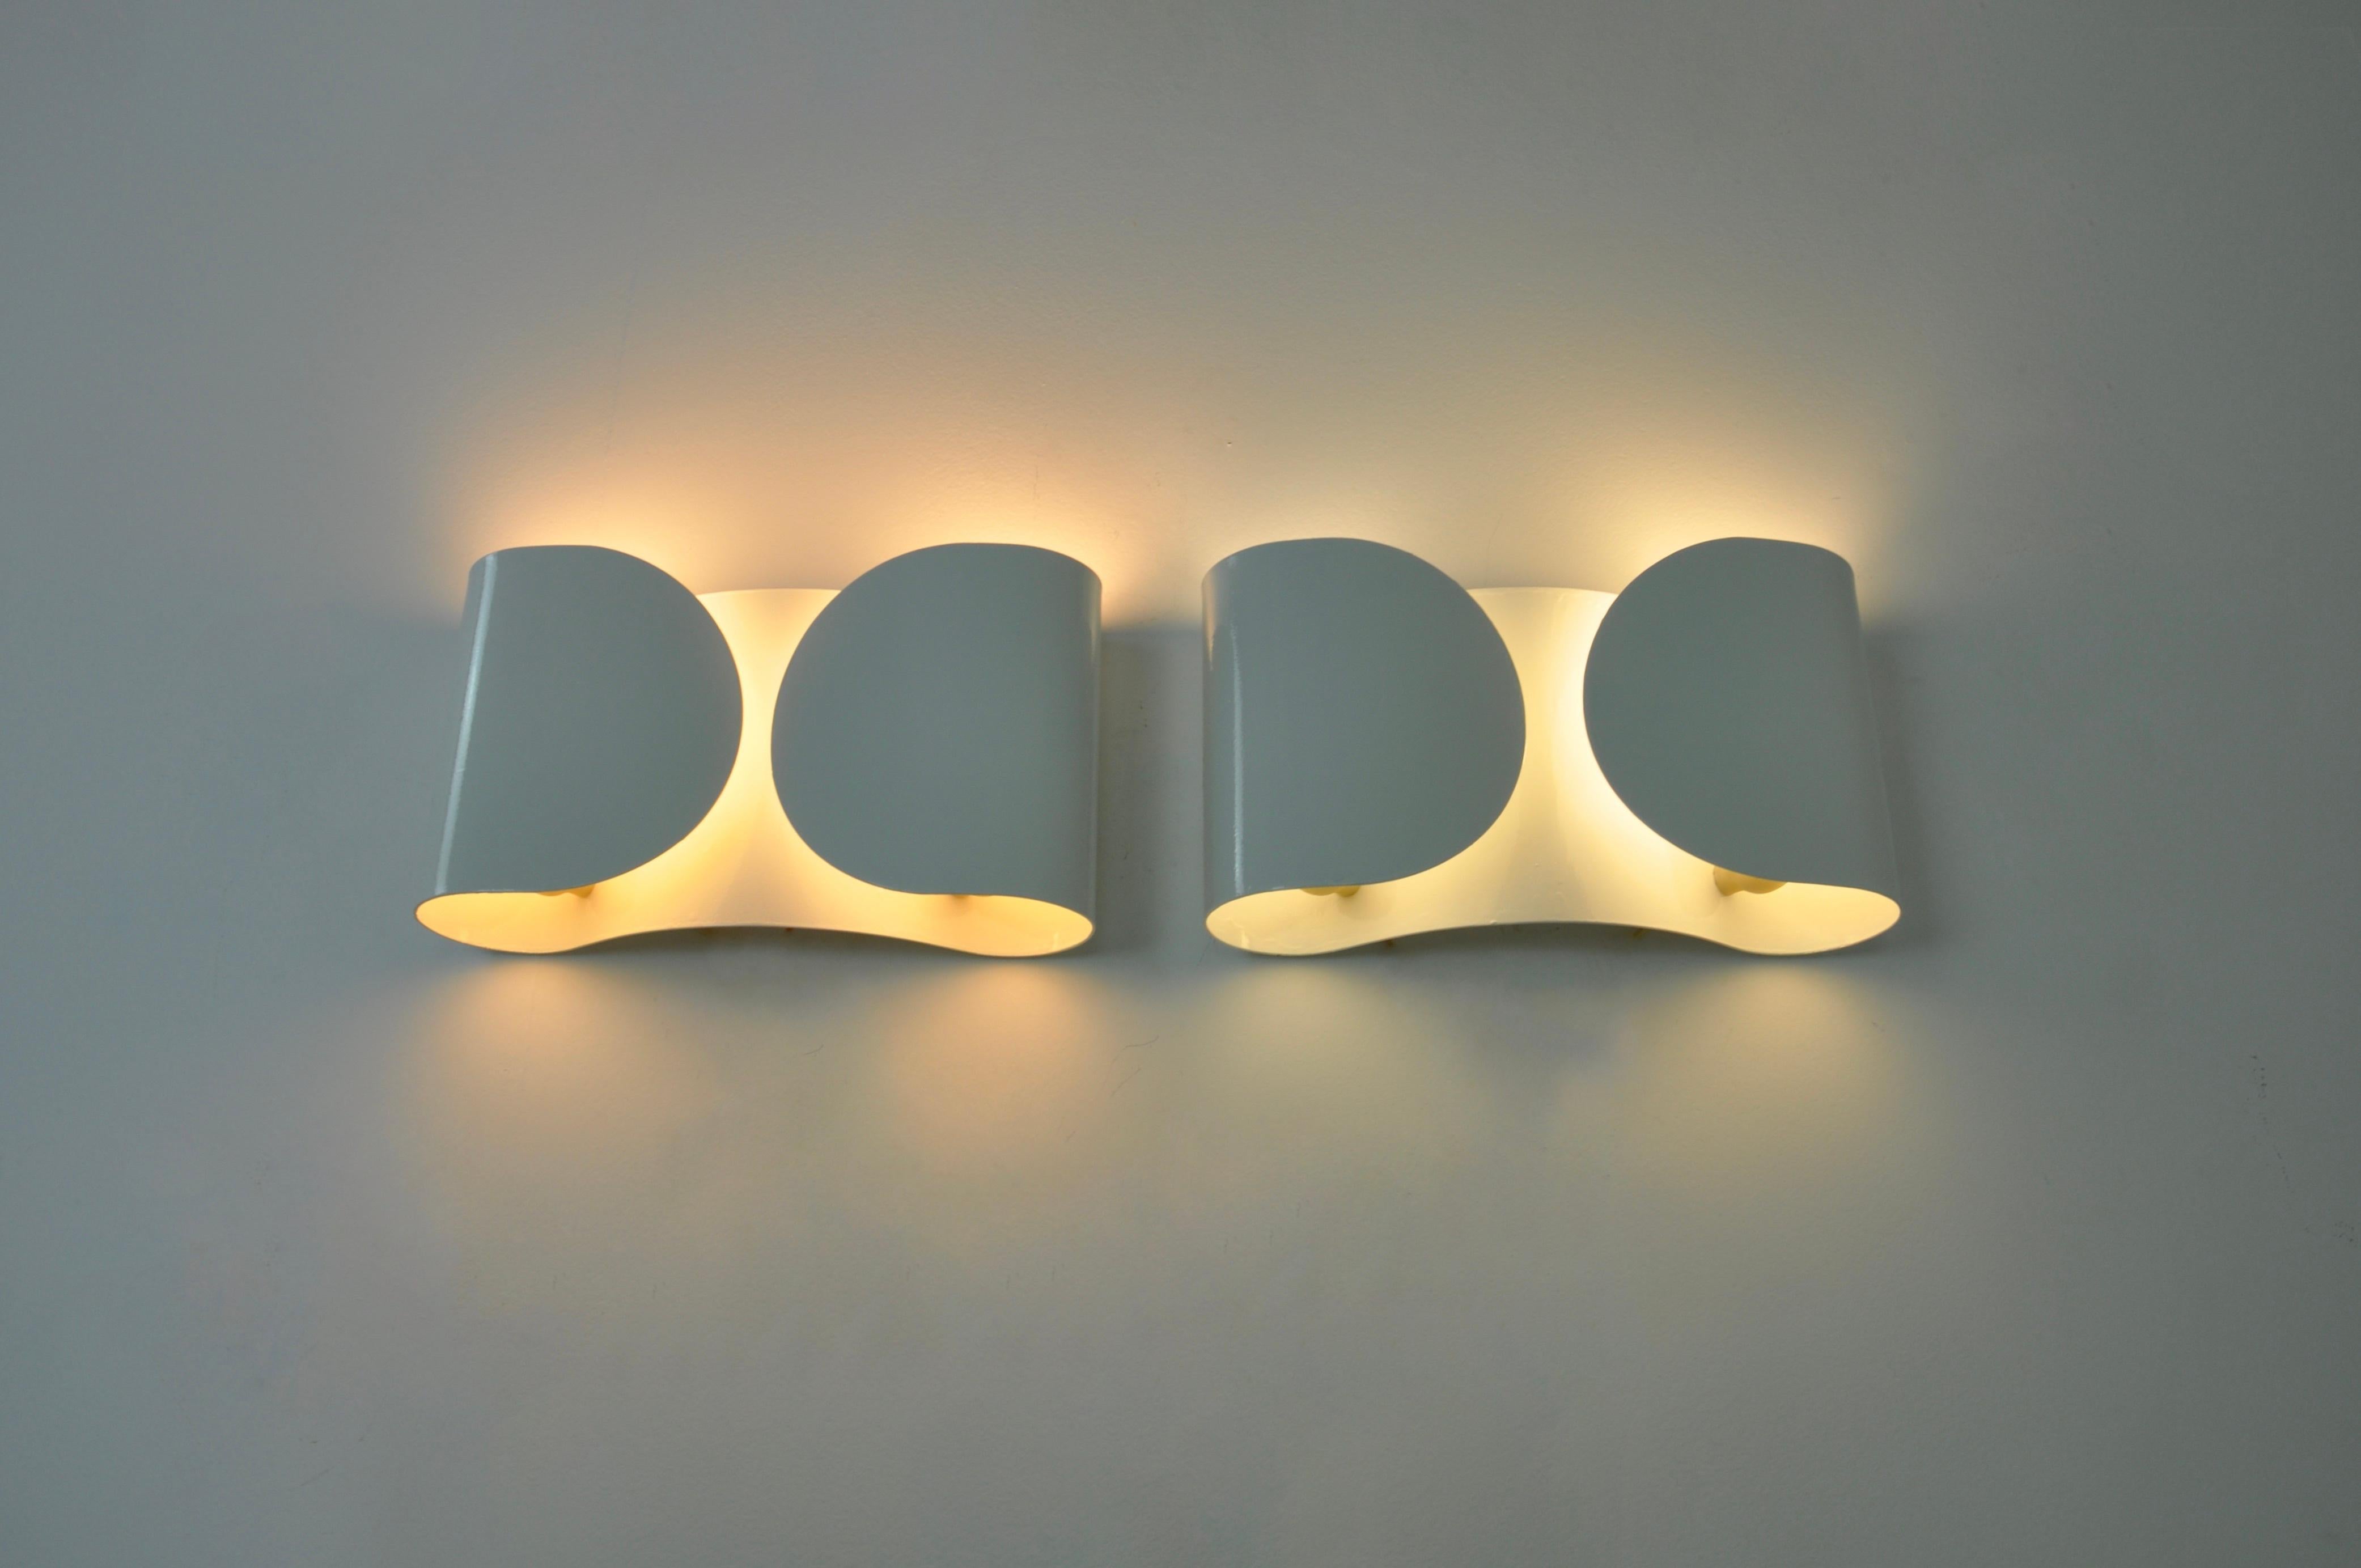 White Foglio Wall Lamps by Tobia & Afra Scarpa for Flos, 1960s Set of 2 For Sale 2